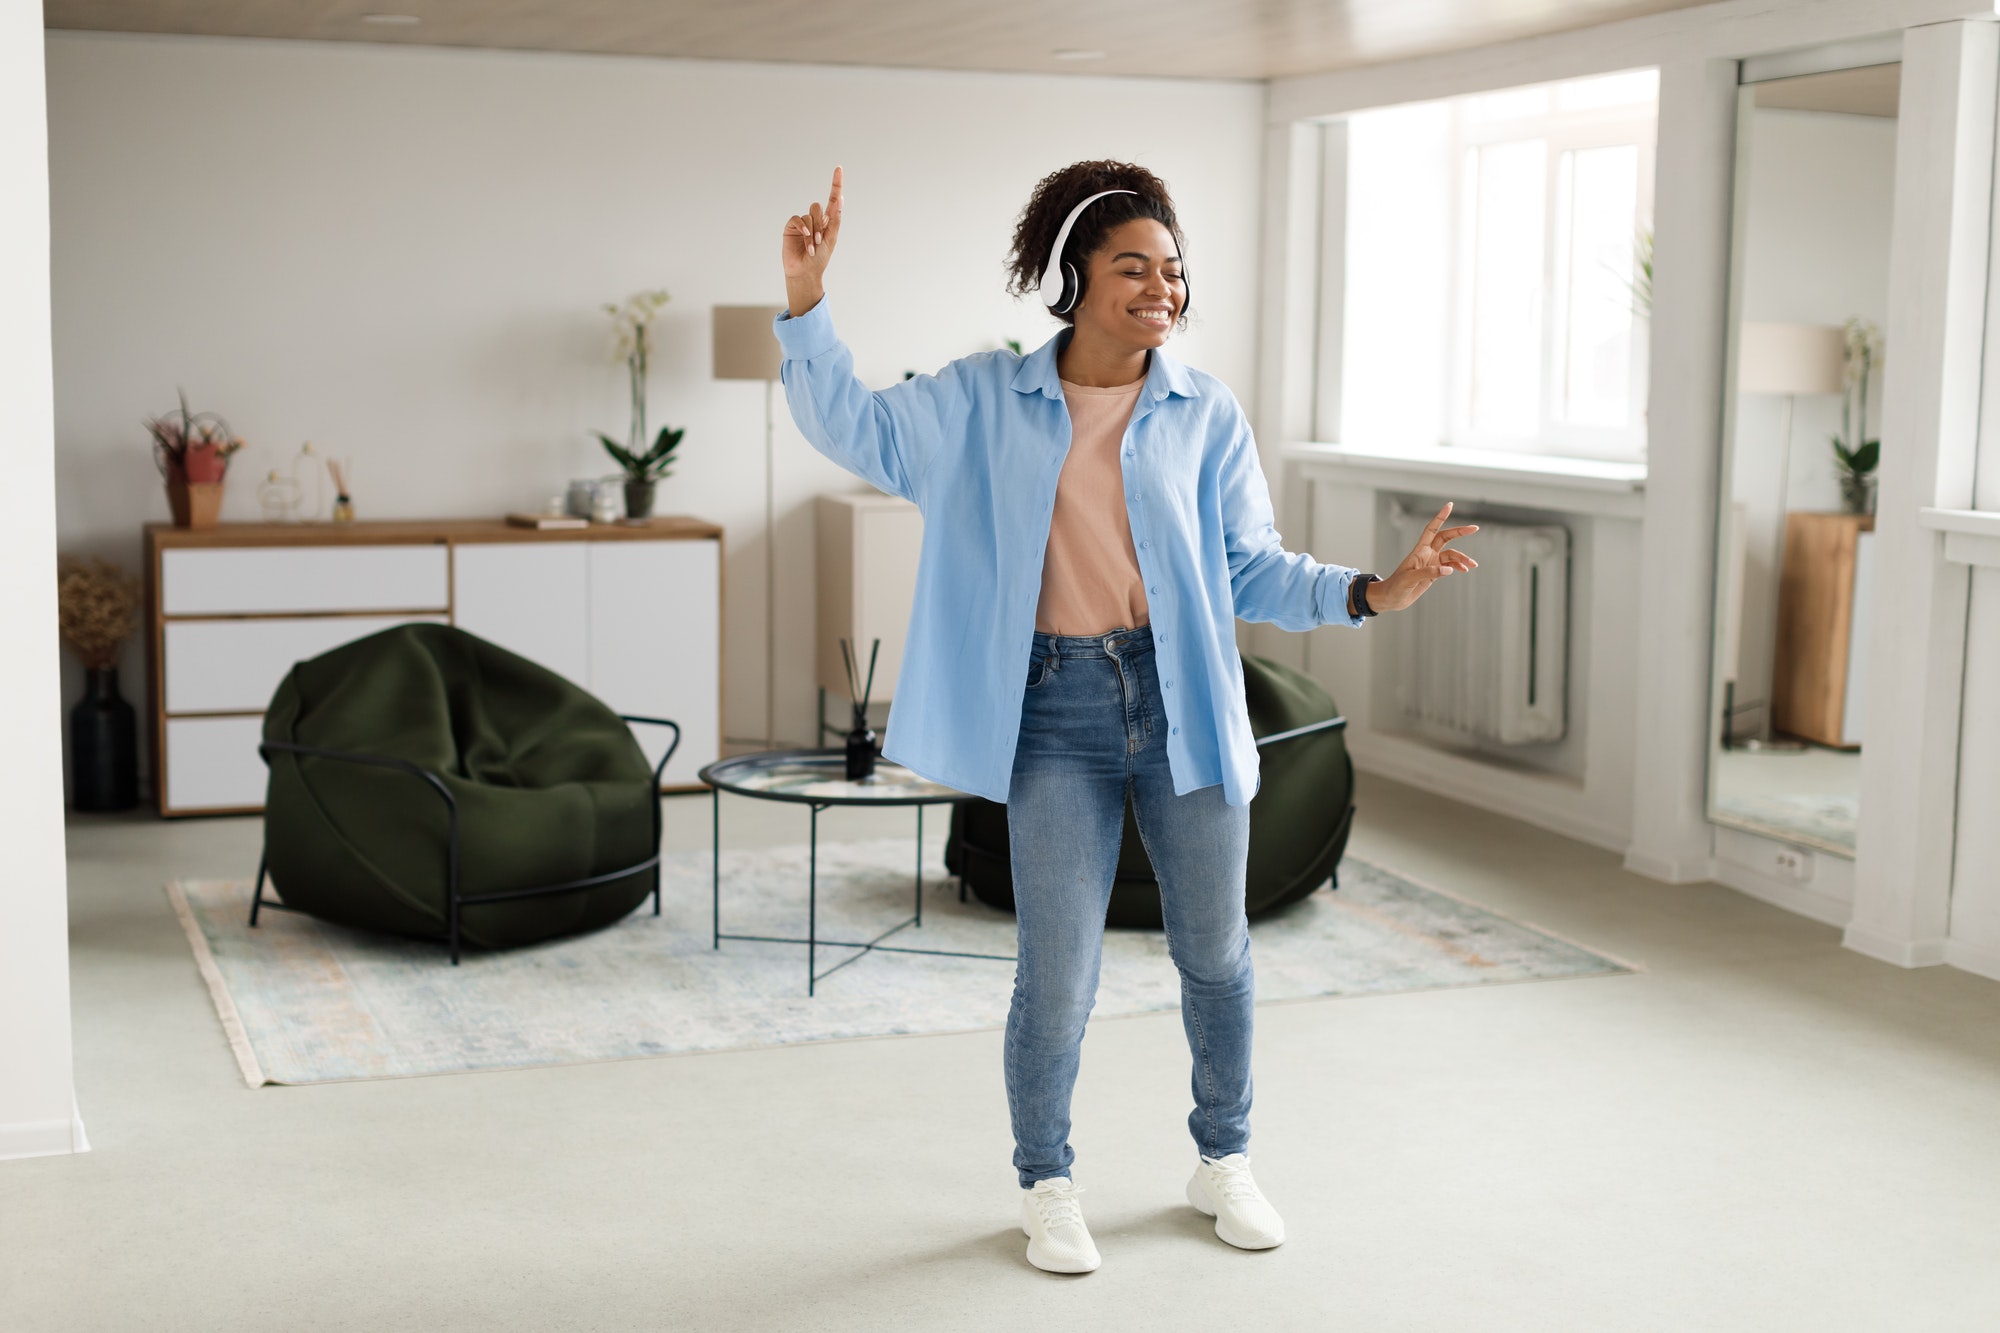 Black lady listening to music and dancing at home